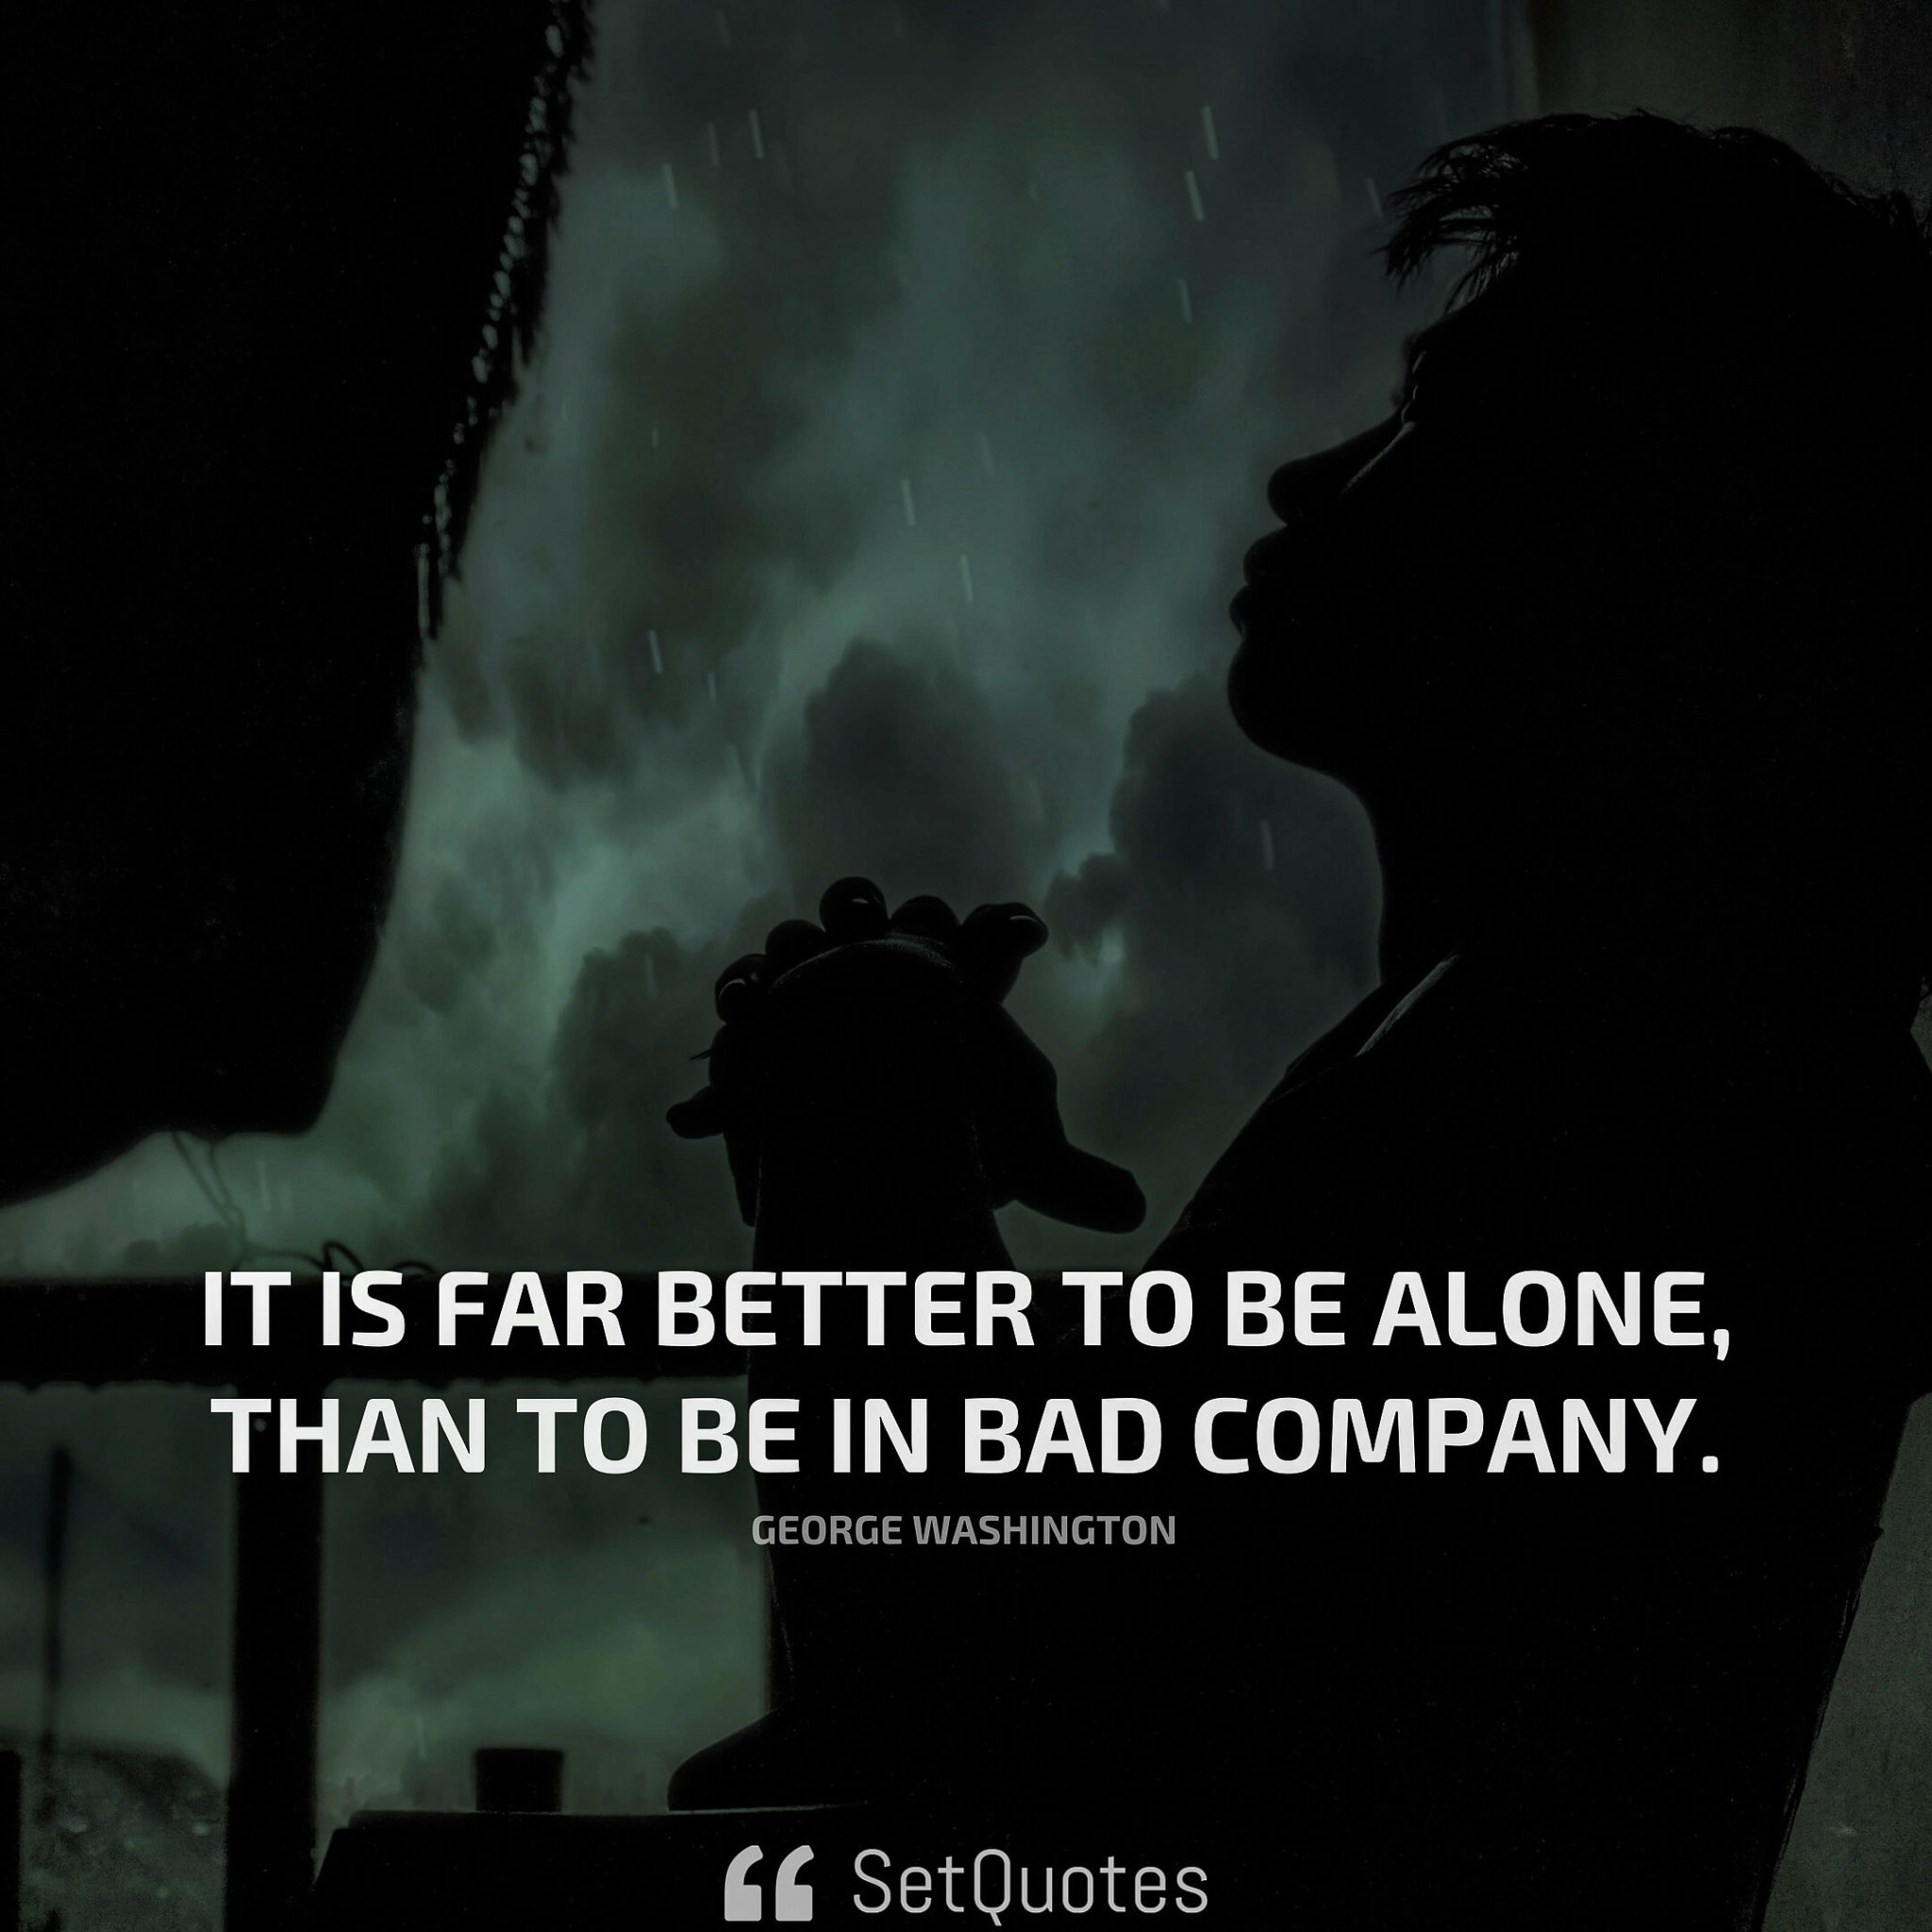 It is far better to be alone, than to be in bad company. - George Washington